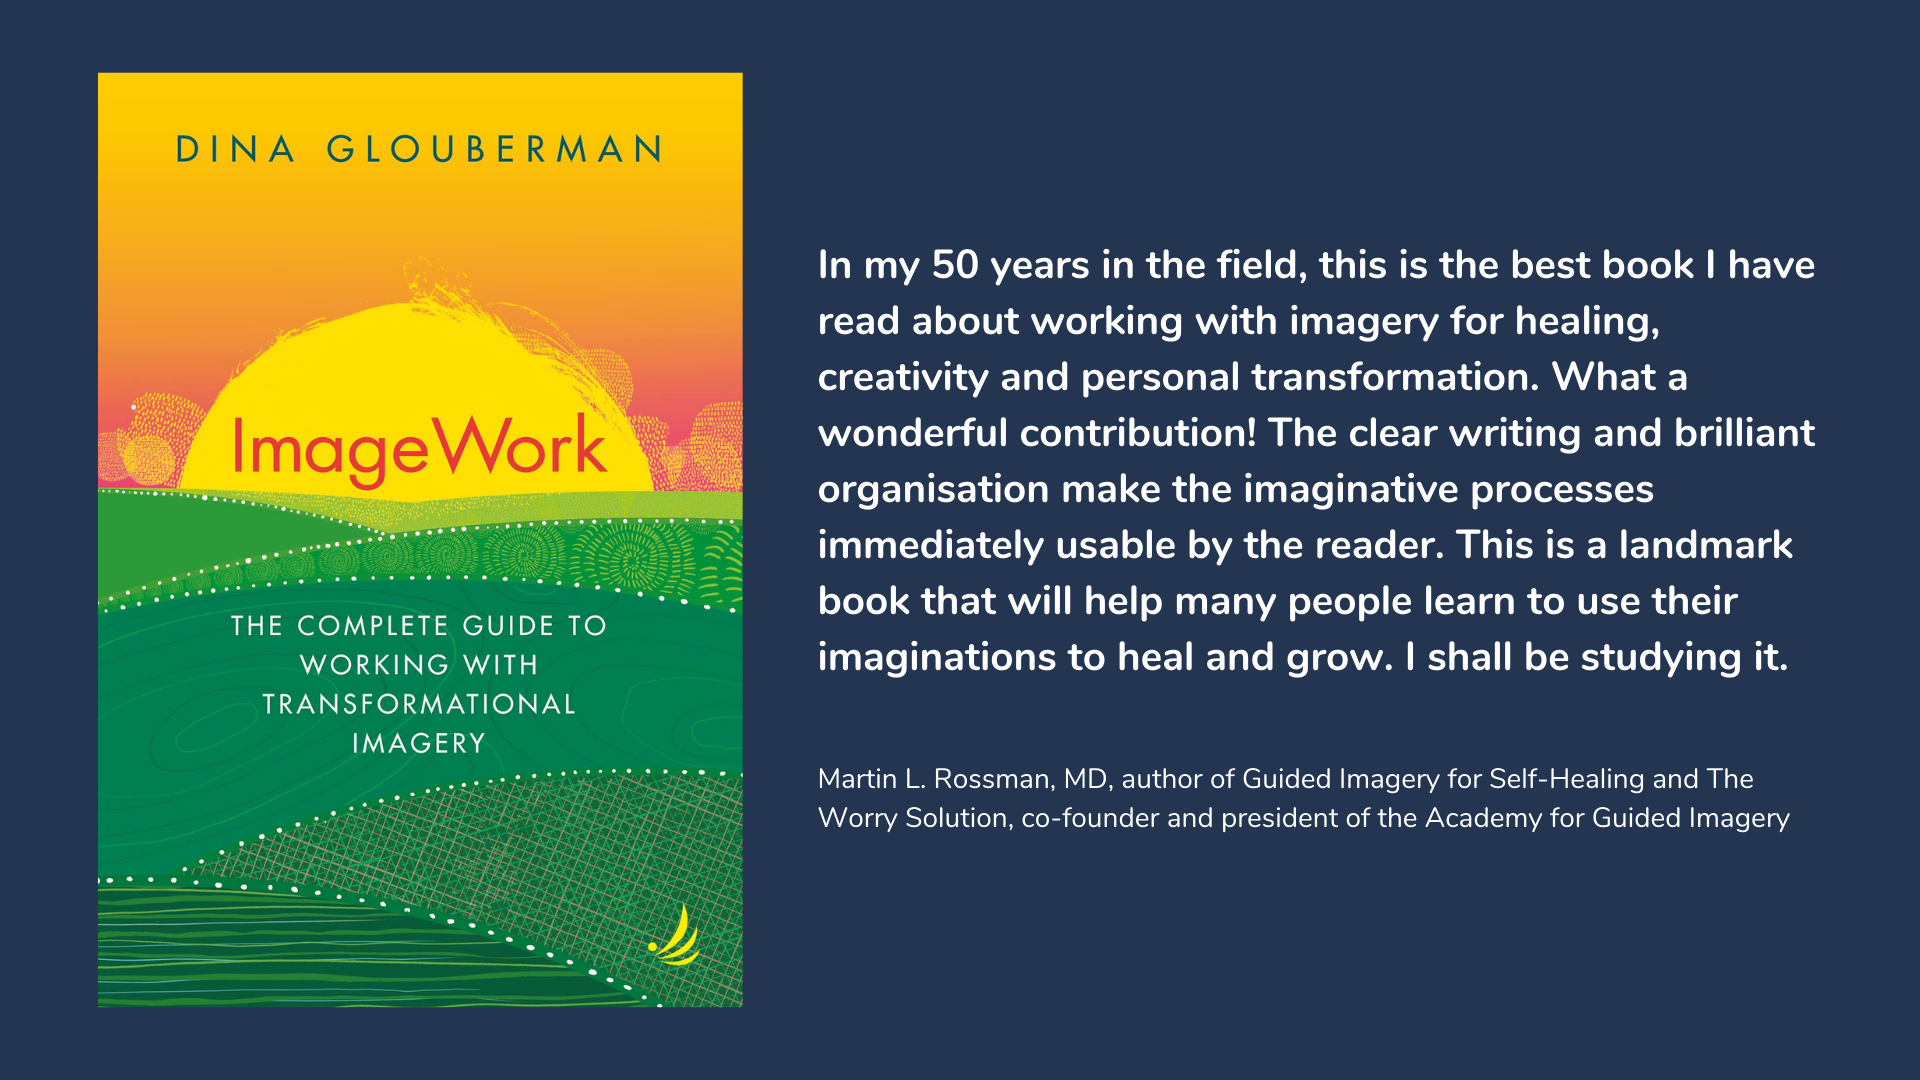 ImageWork: The Complete Guide To Working With Transformational Imagery, book cover and description.